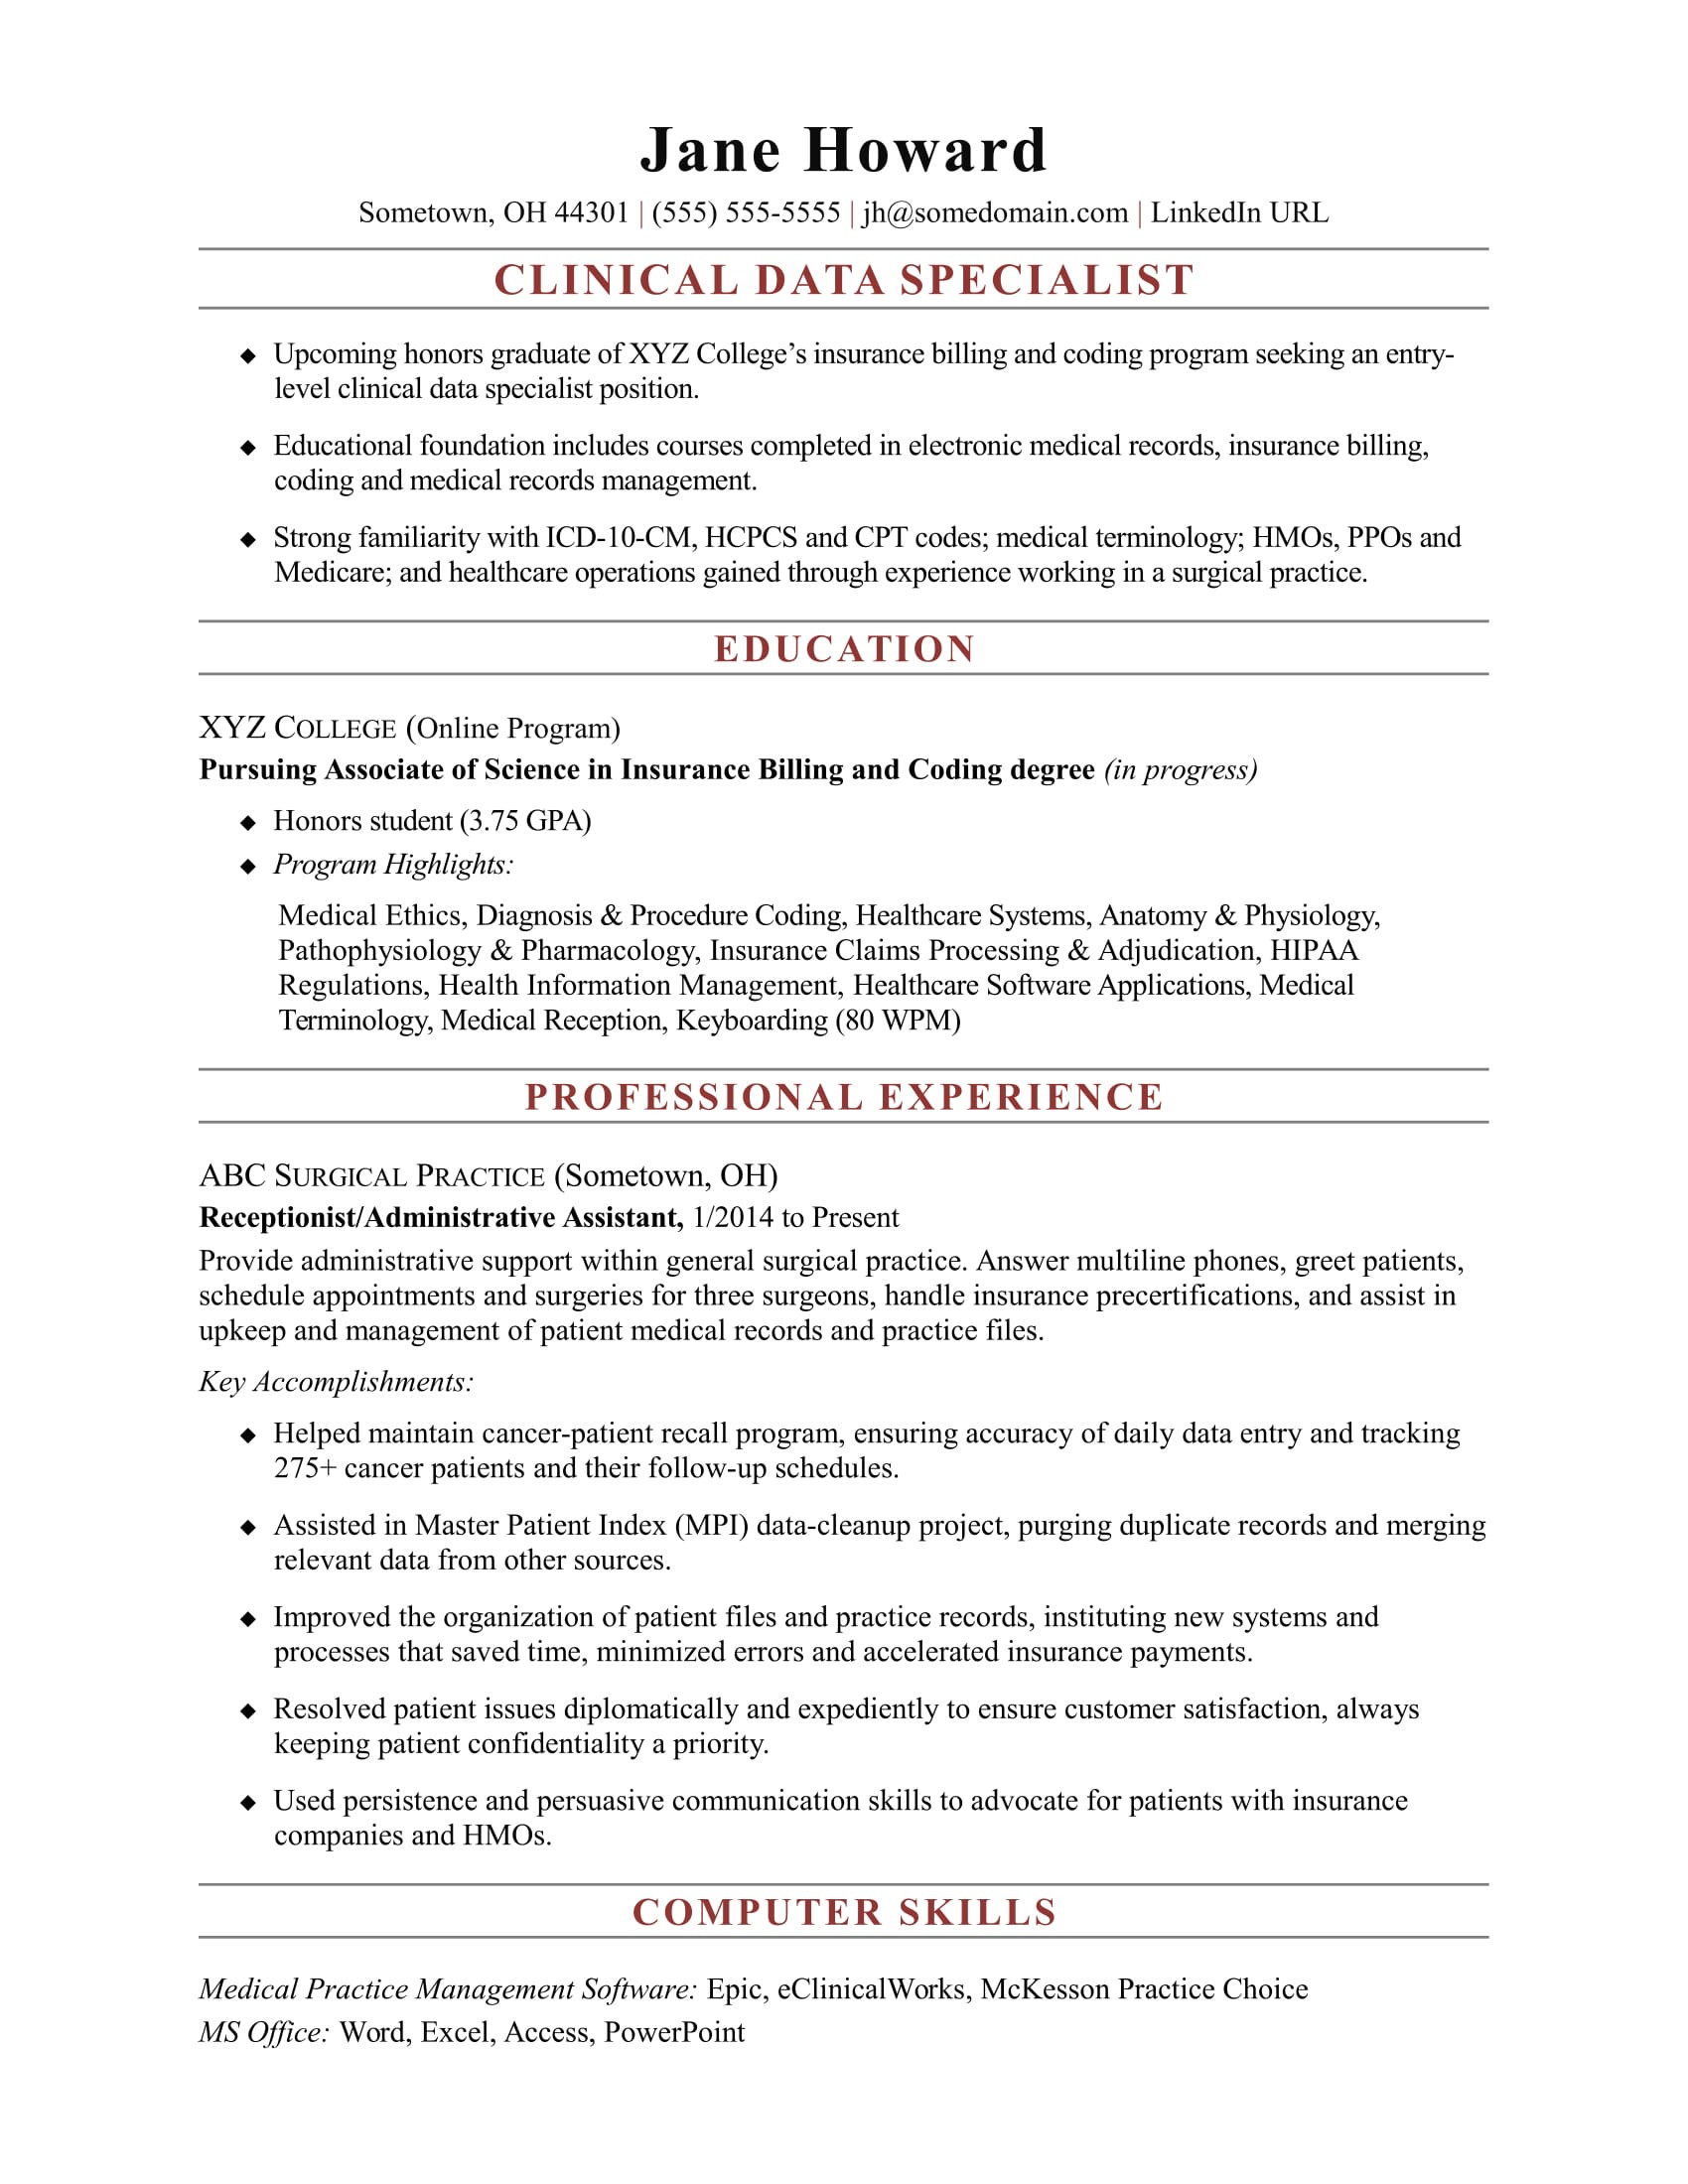 Sample Resume with Masters In Healthcare Administration In Progress Entry-level Clinical Data Specialist Resume Sample Monster.com